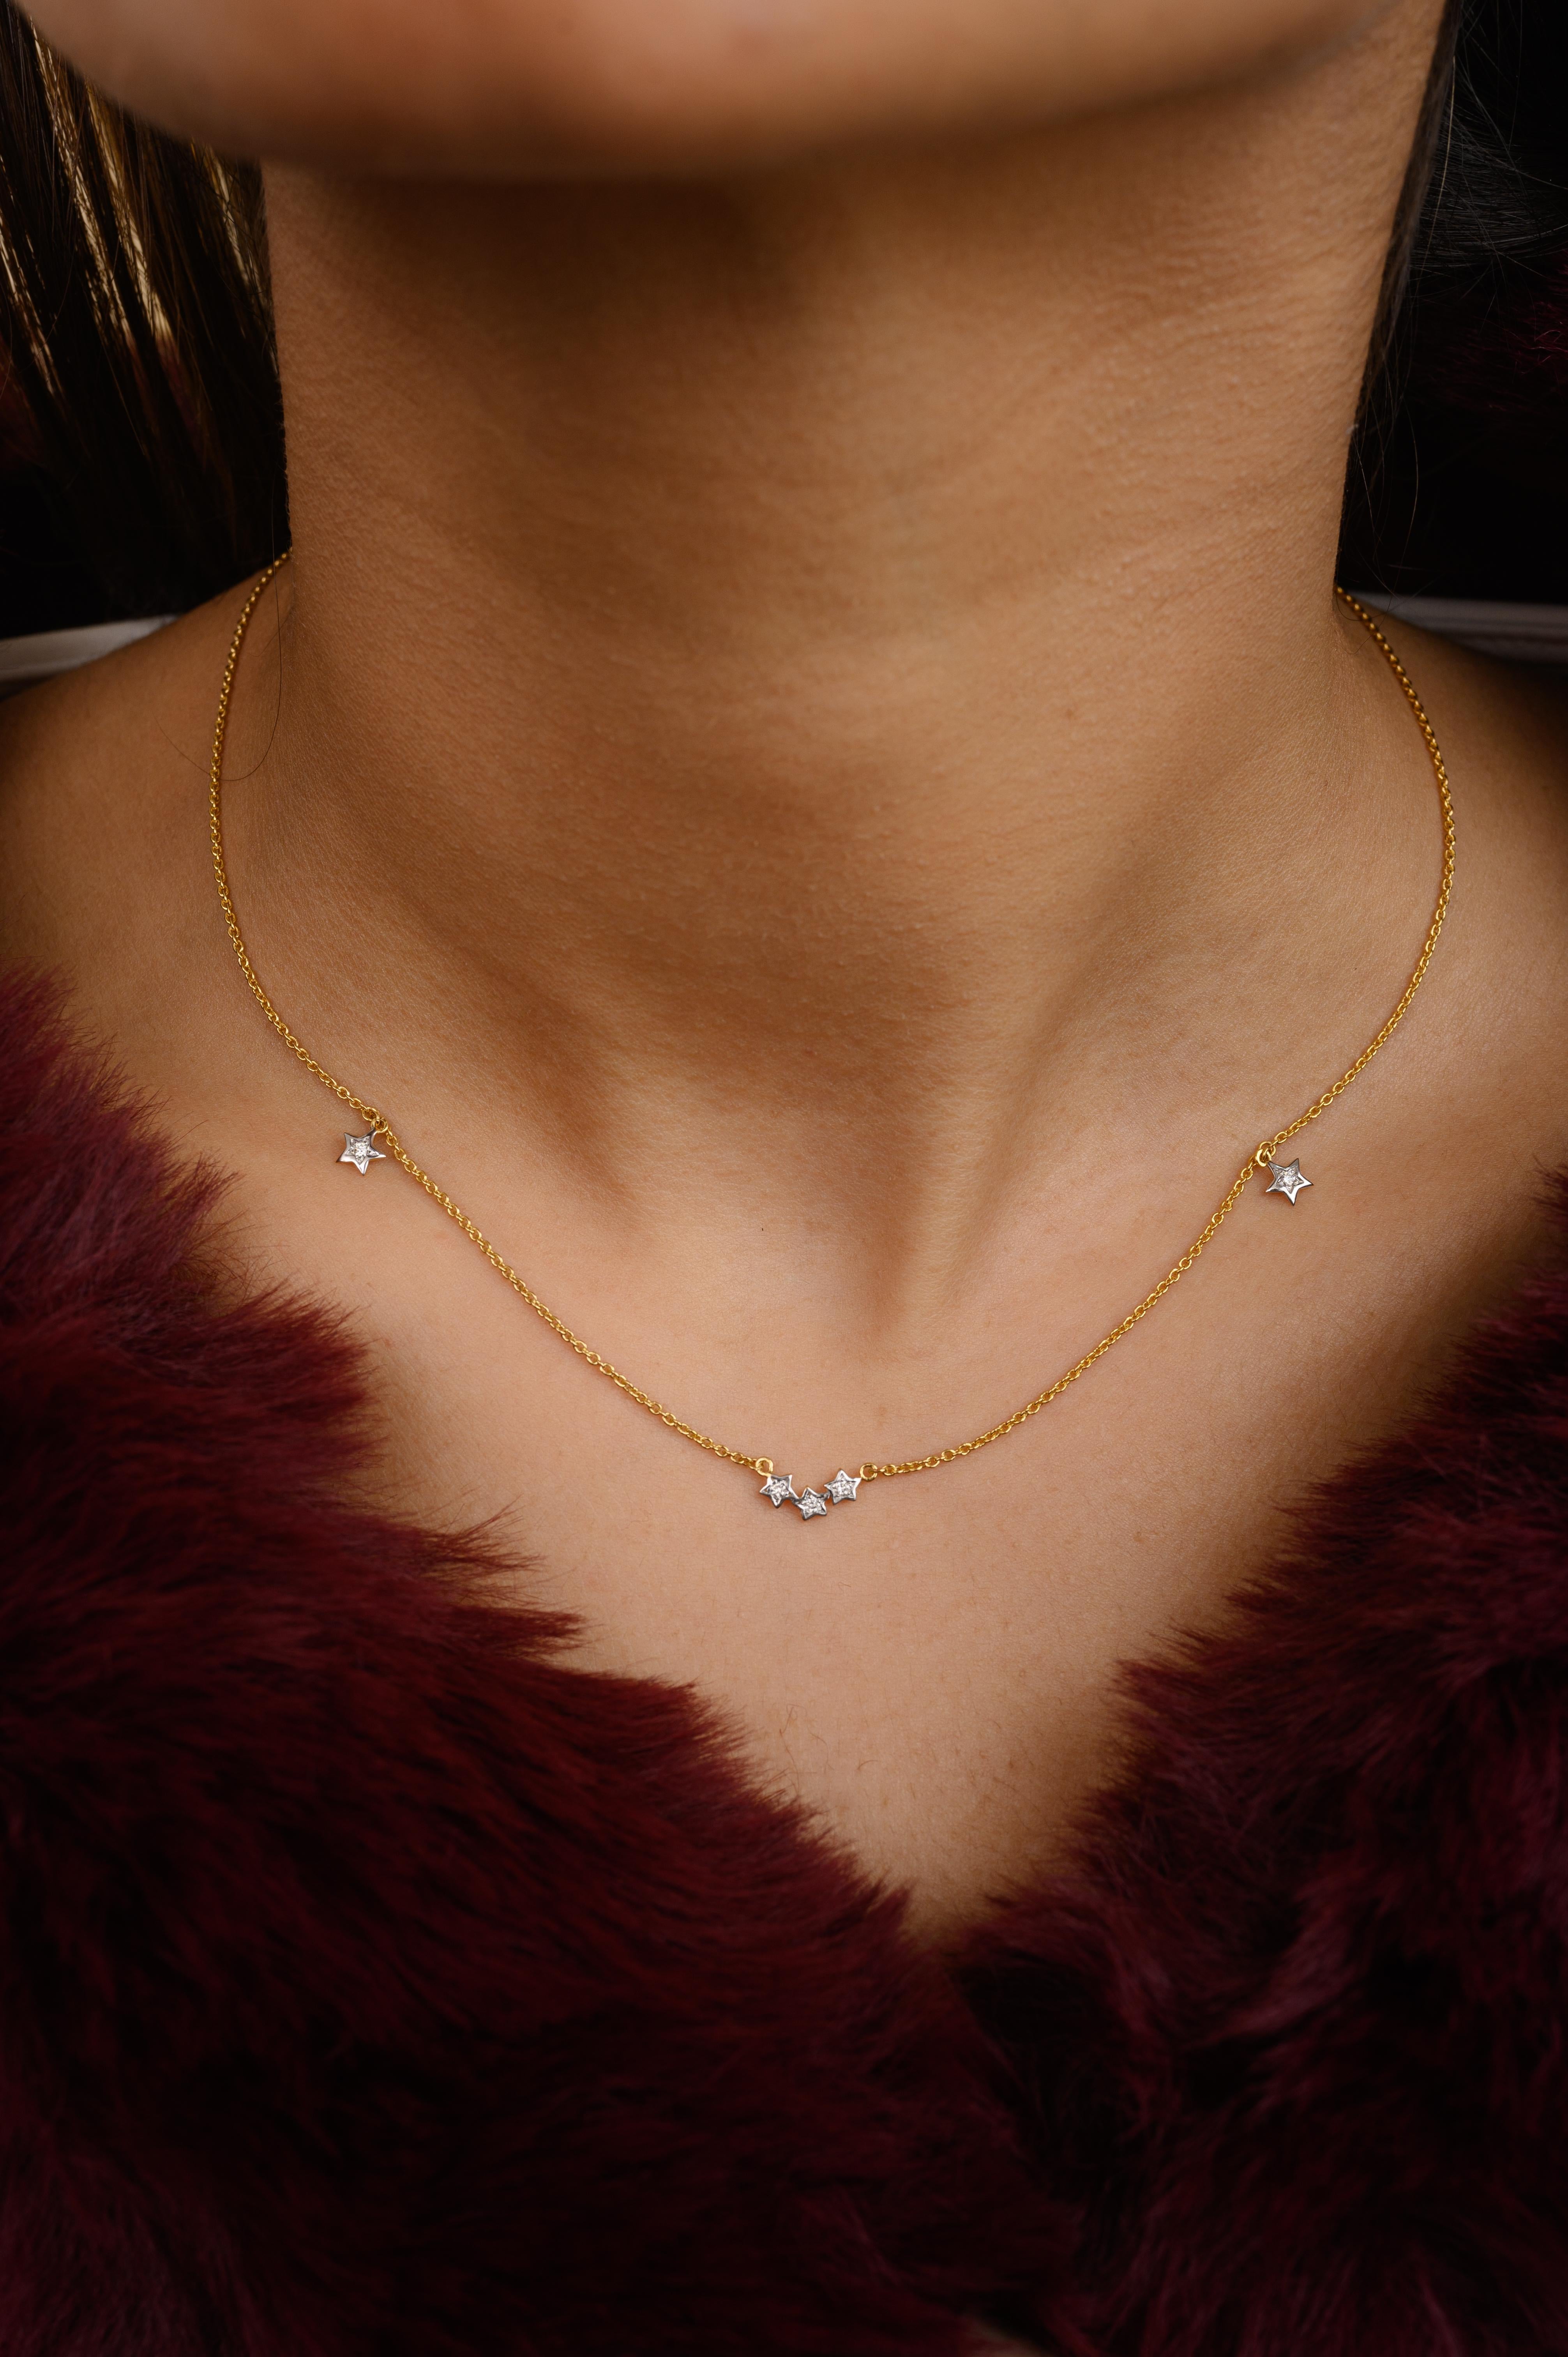 Diamond Star Everyday Necklace in 14K gold studded with round cut diamond. This stunning piece of jewelry instantly elevates a casual look or dressy outfit. 
April birthstone diamond brings love, fame, success and prosperity.
Designed with round cut